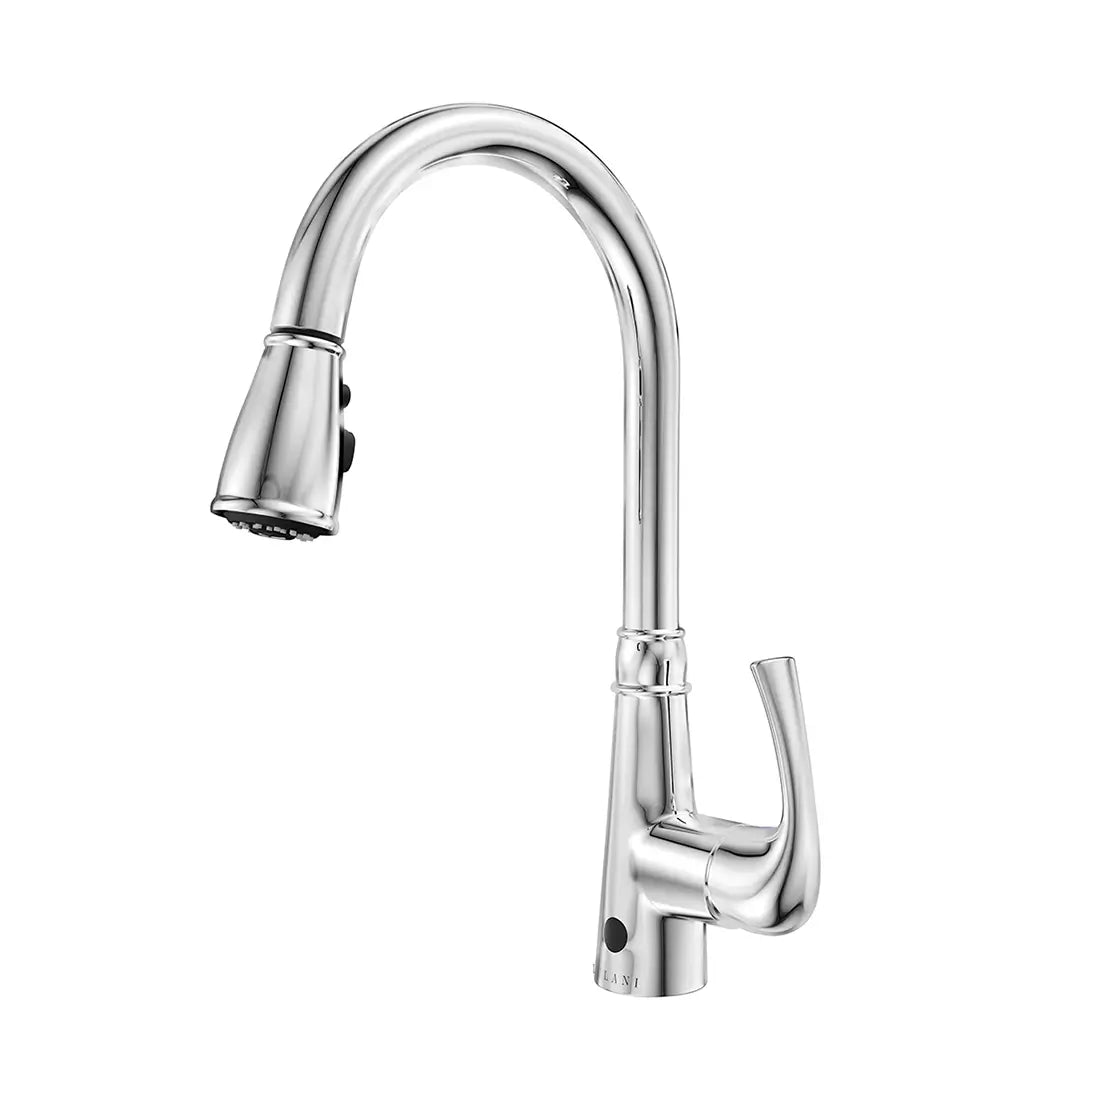 Bloom Pull Out Sink Mixer Chrome, Architectural Designer products